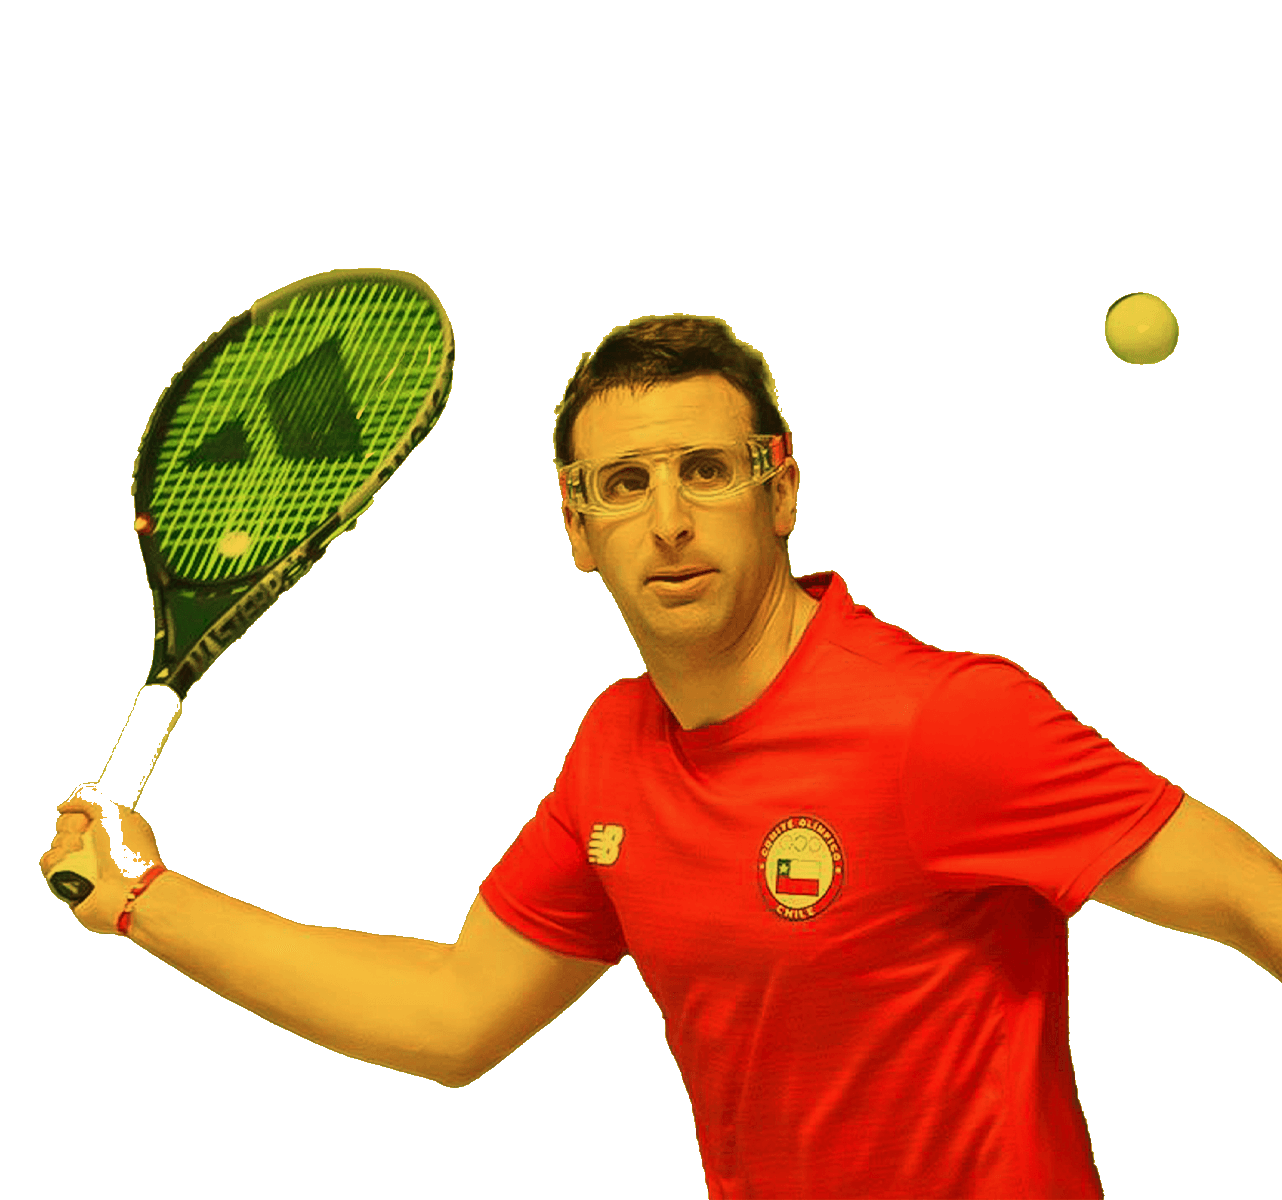 In the picture, a male basque pelota player about to hit the ball with his racket.